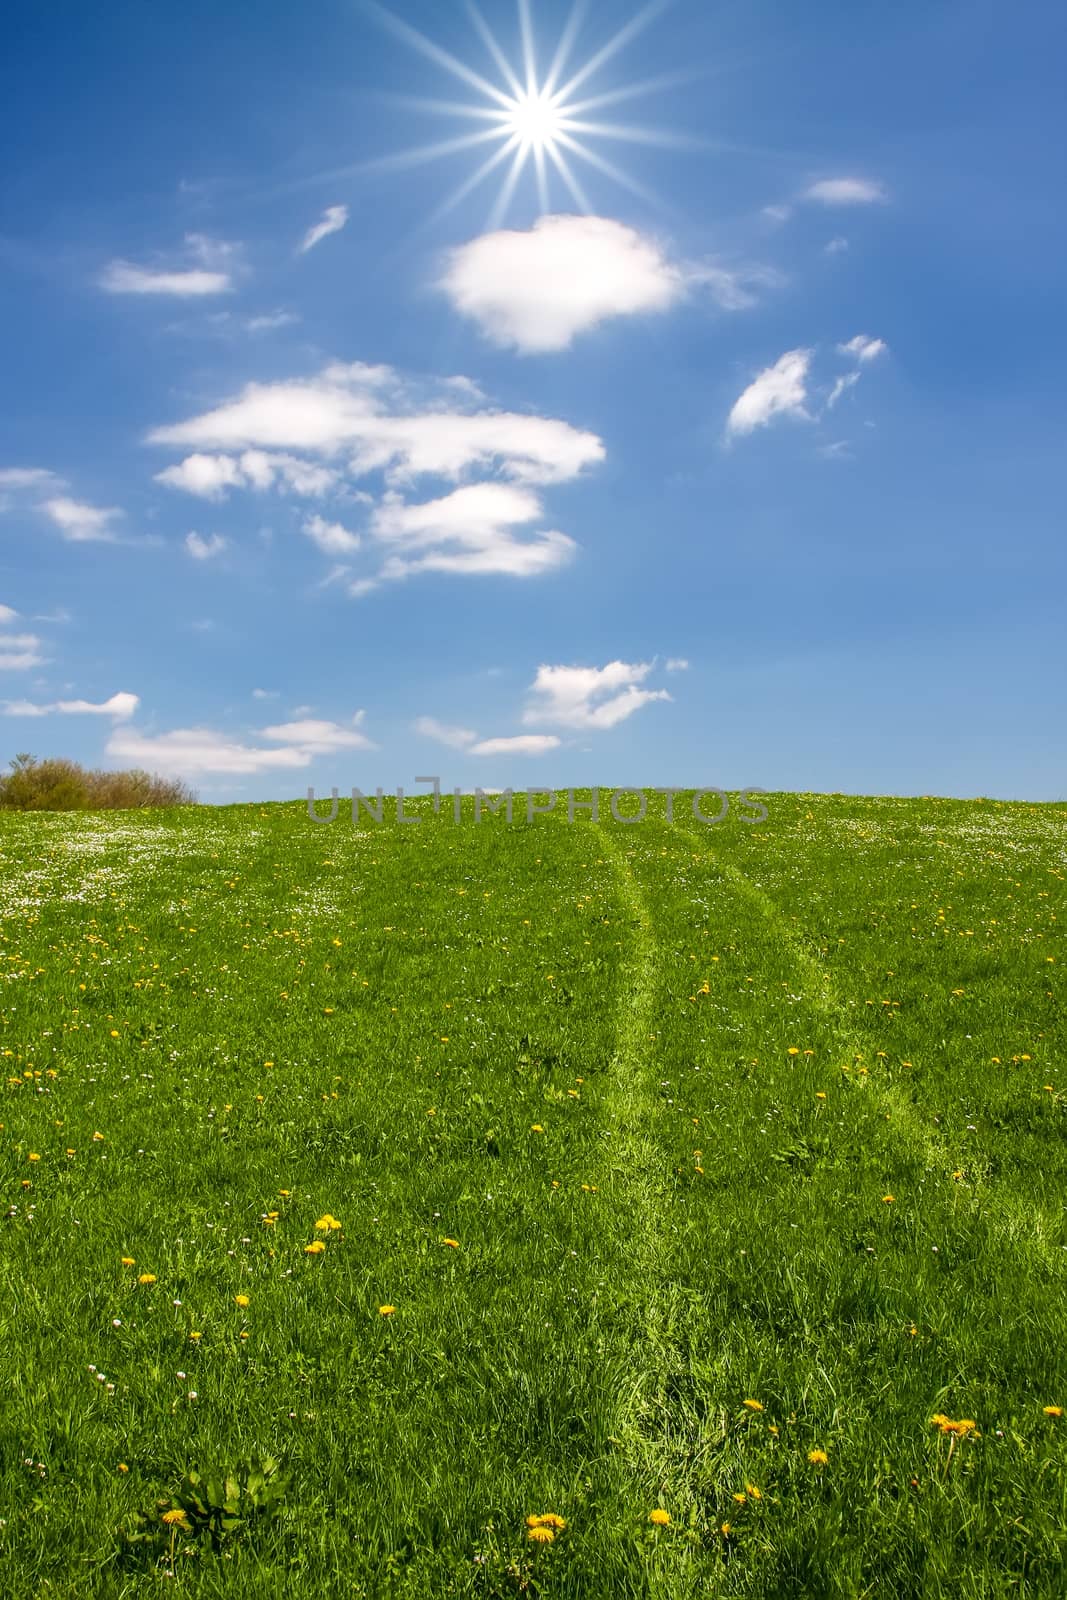 An image of some tracks in the grass